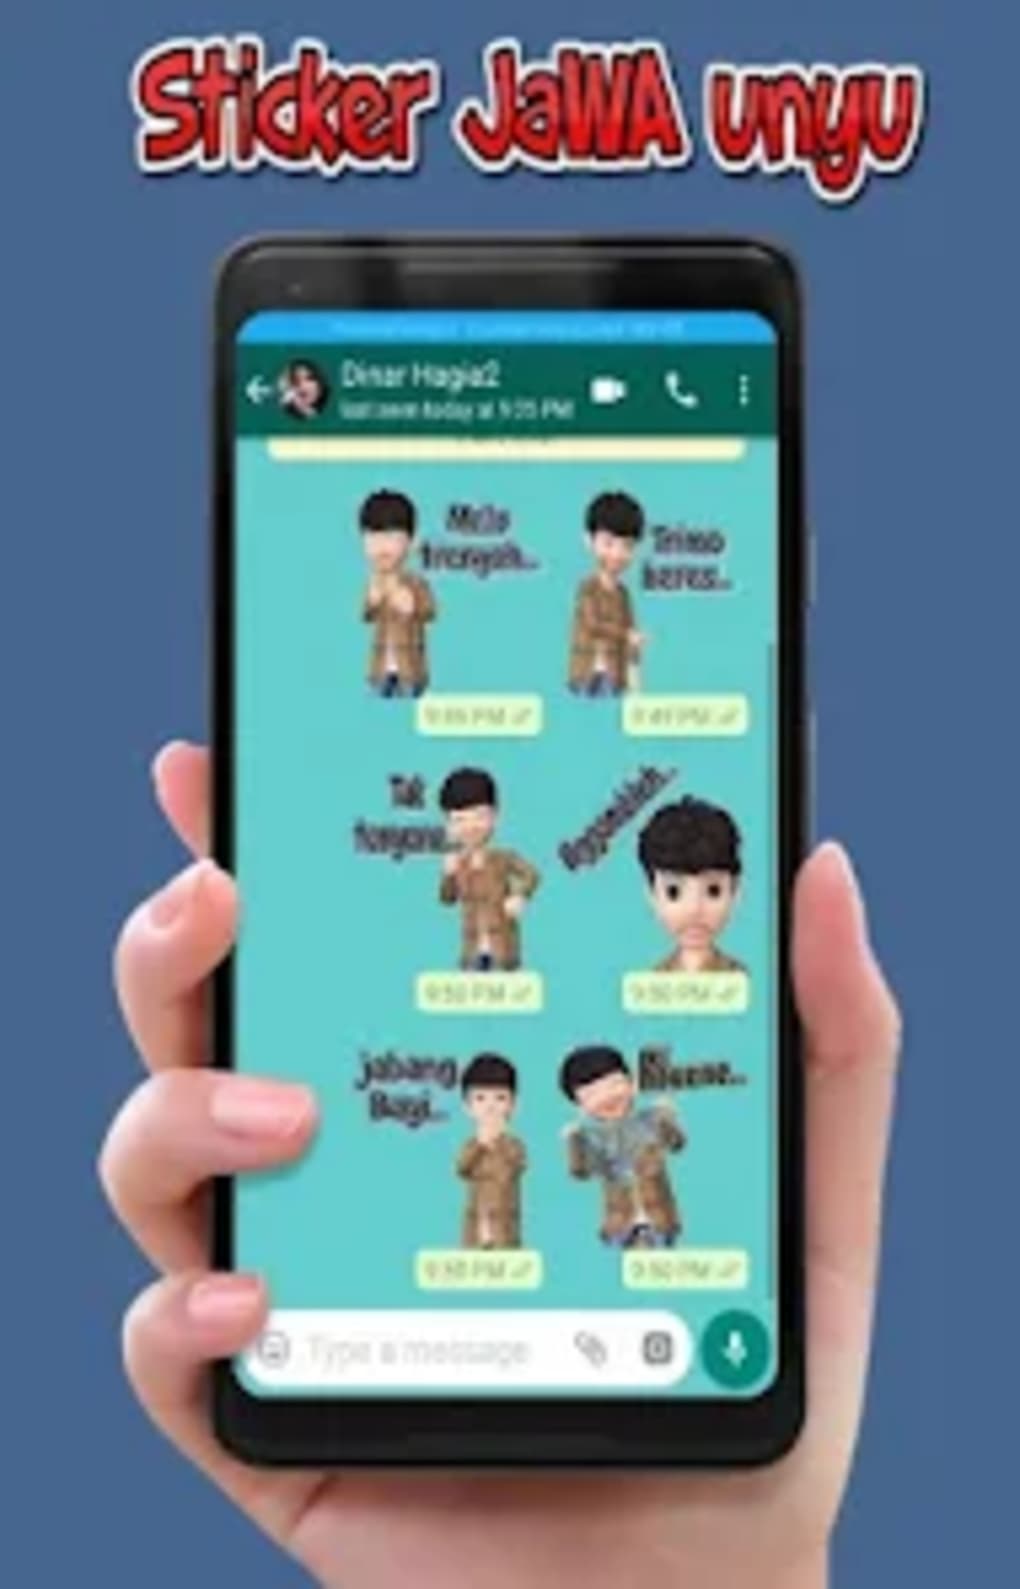 Sticker jaWA Lucu- Plesetan for Android - Download